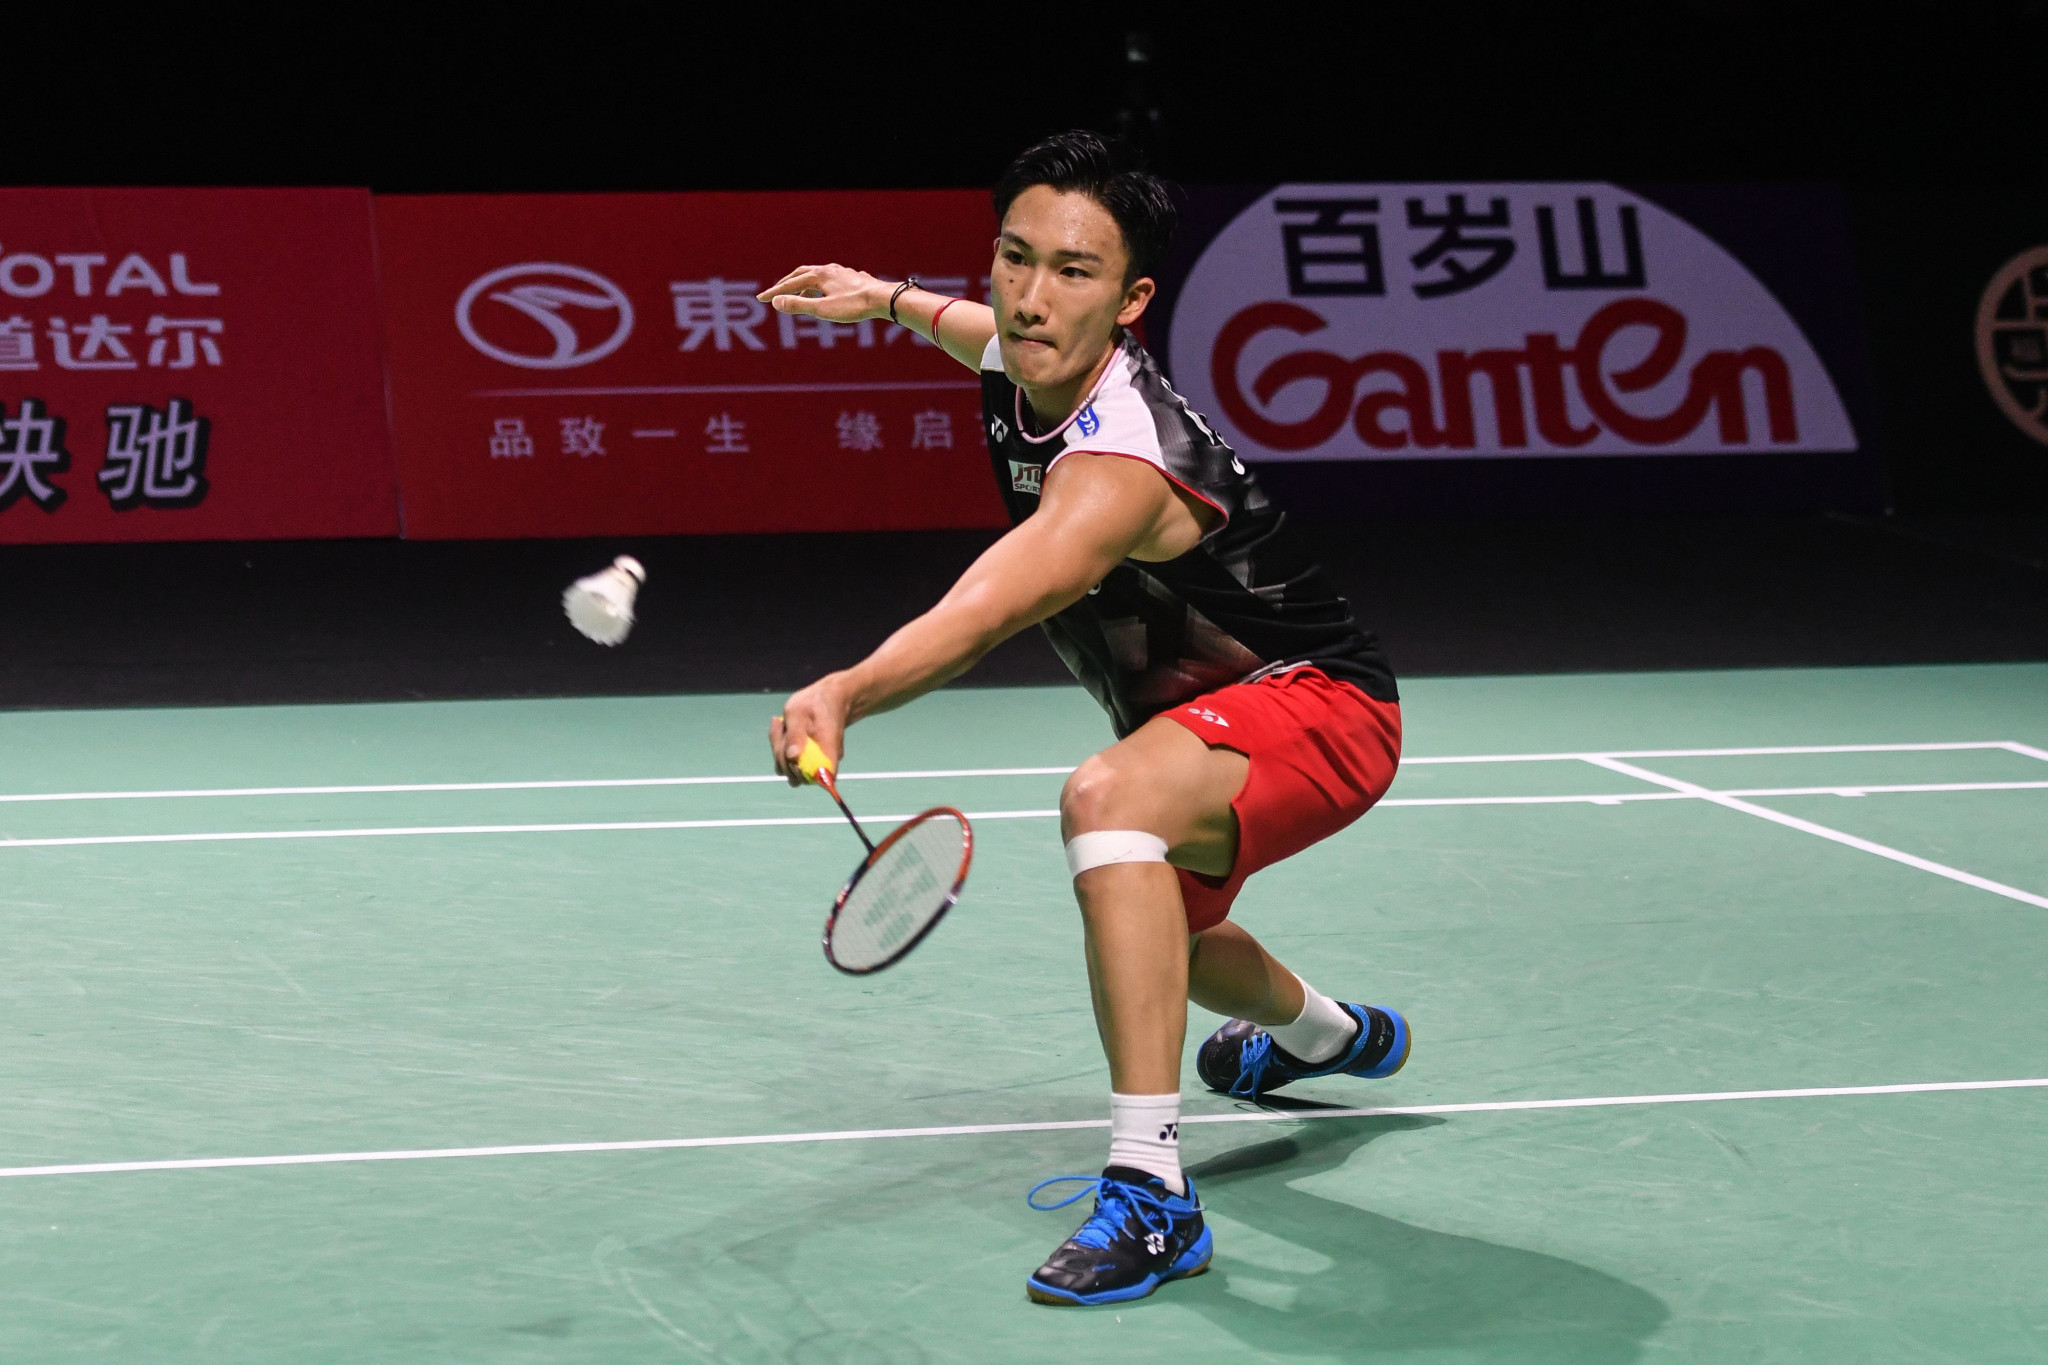 World champion Kento Momota will begin as favourite for the men's singles title ©Getty Images